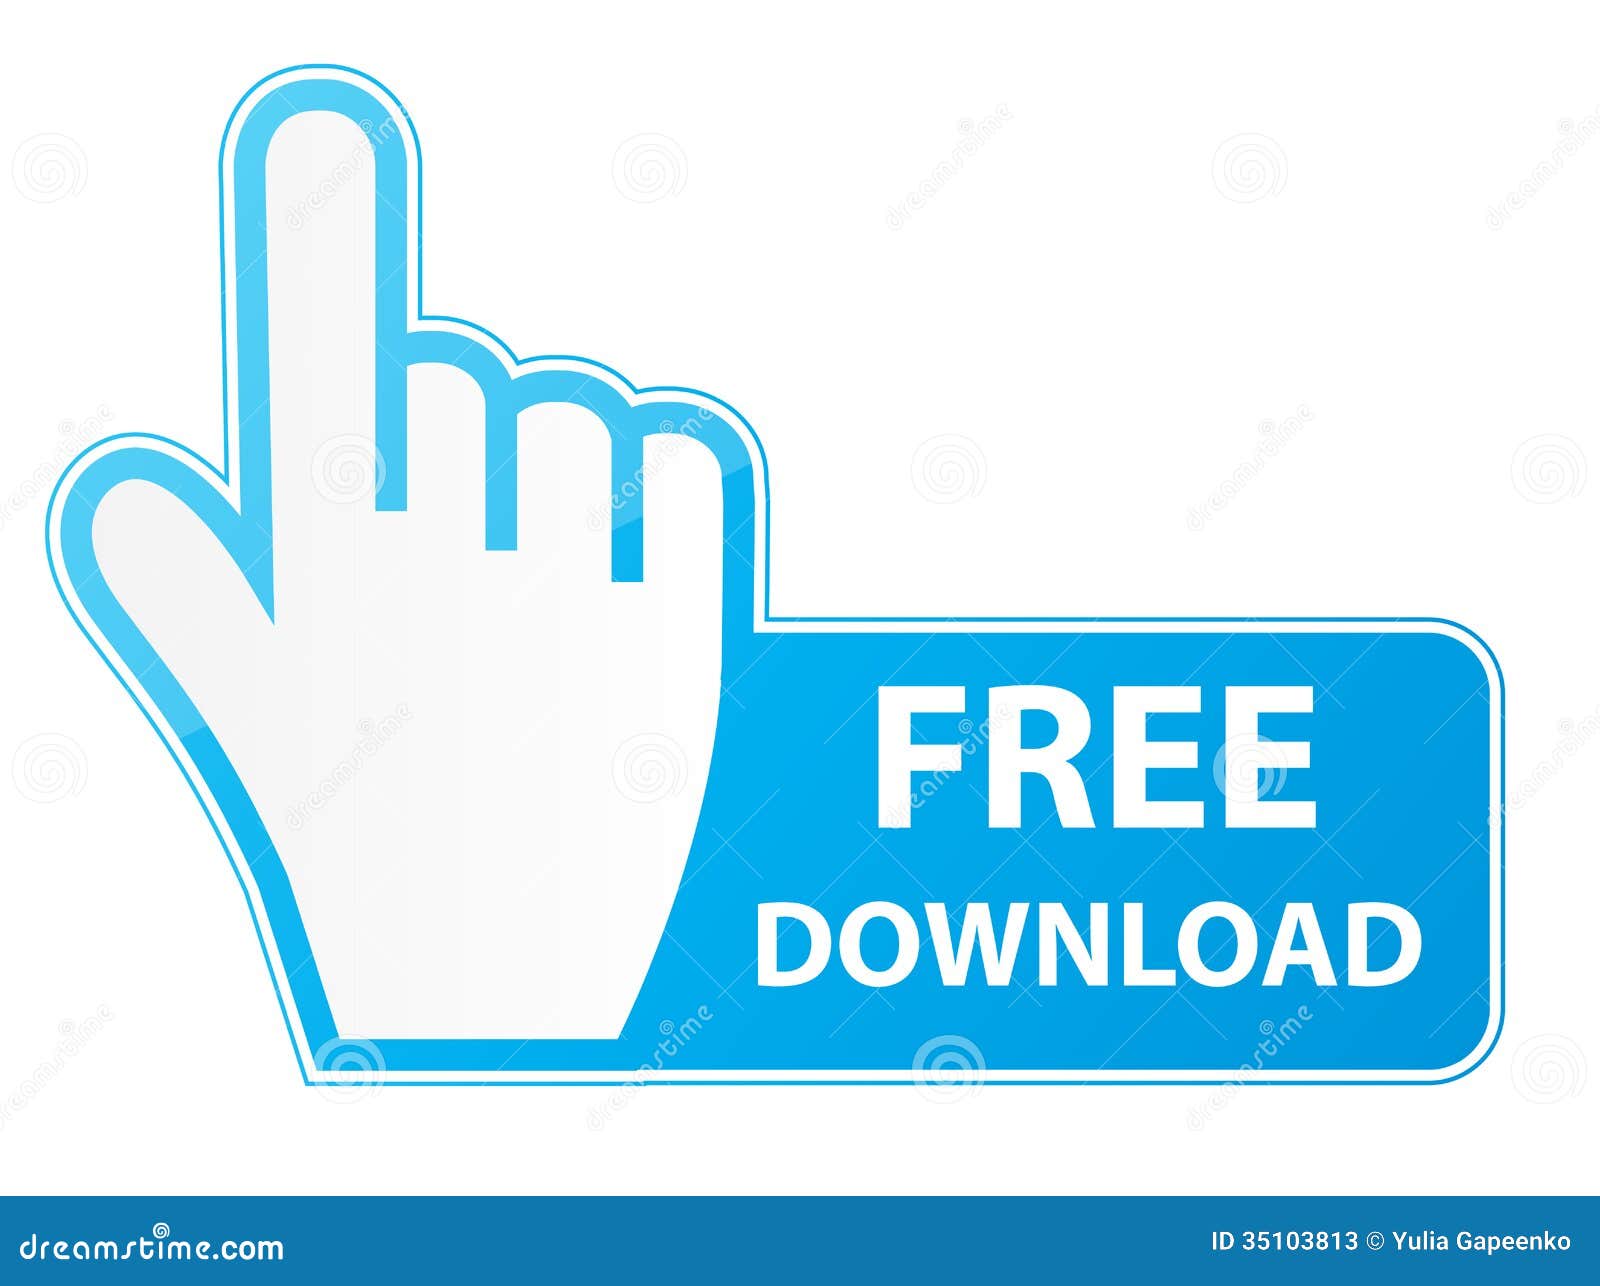 mouse hand cursor free download button vector illustration file eps format 35103813 - Updated California